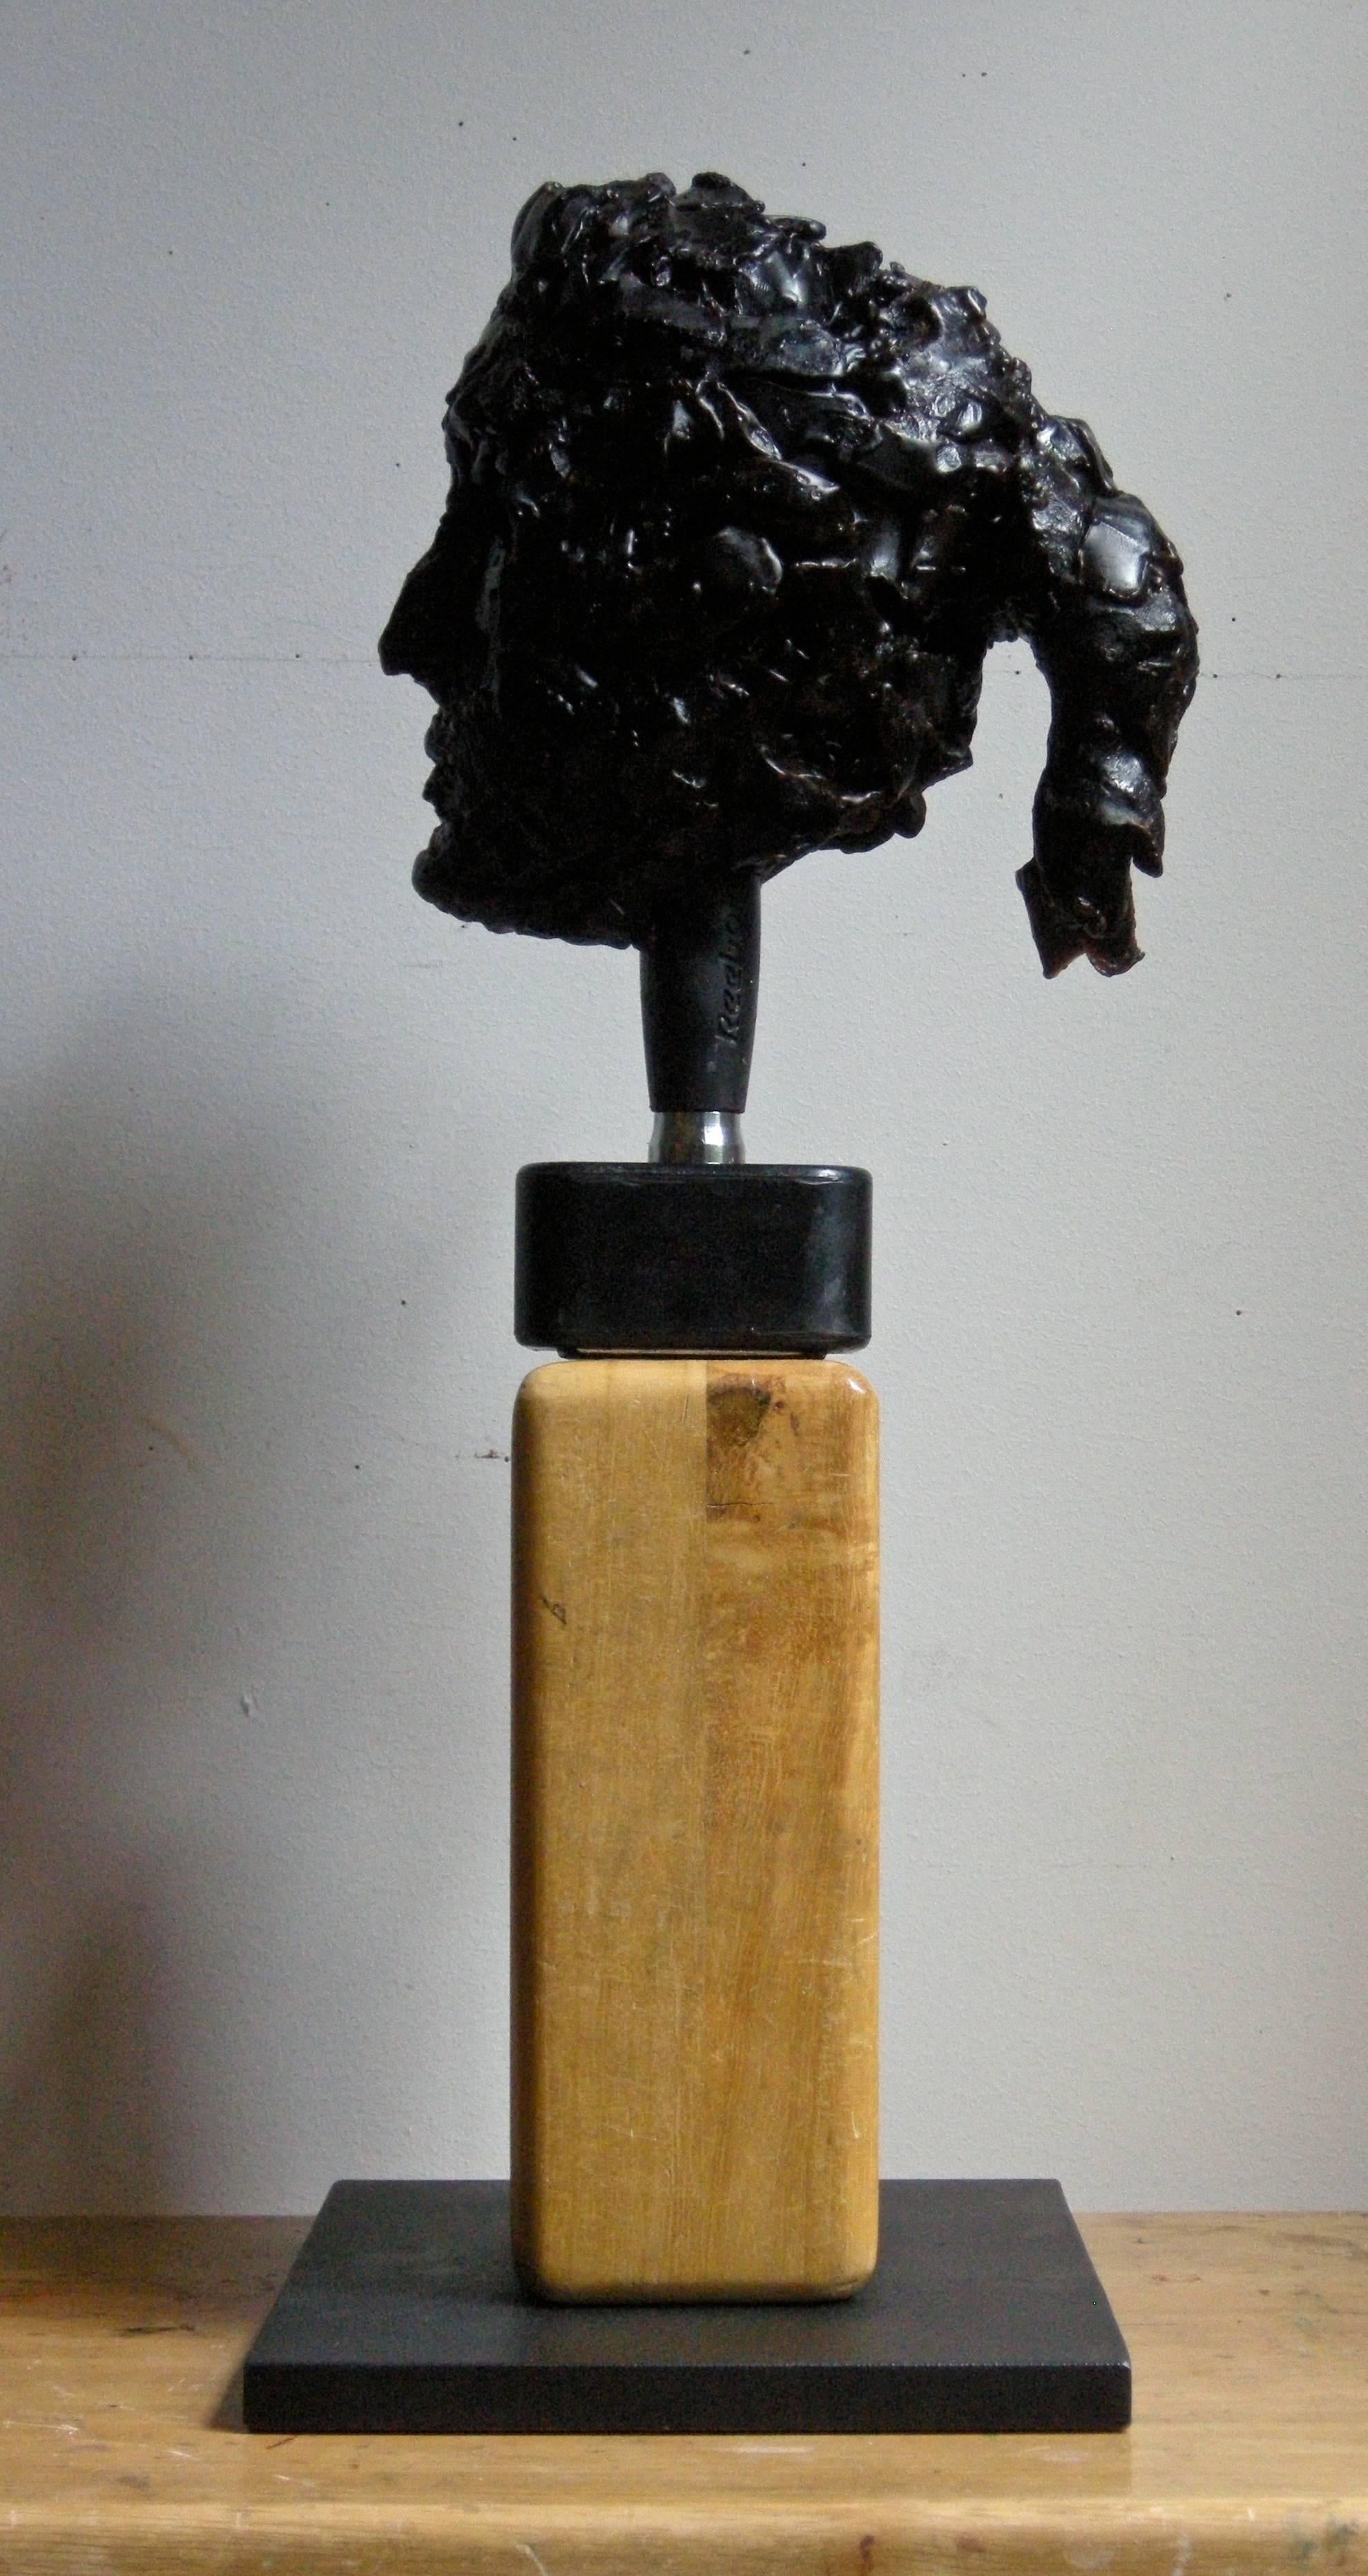 John Goodman Figurative Sculpture - Bust / Head No. 2 2014 (with Yoga Block and Dumbell)